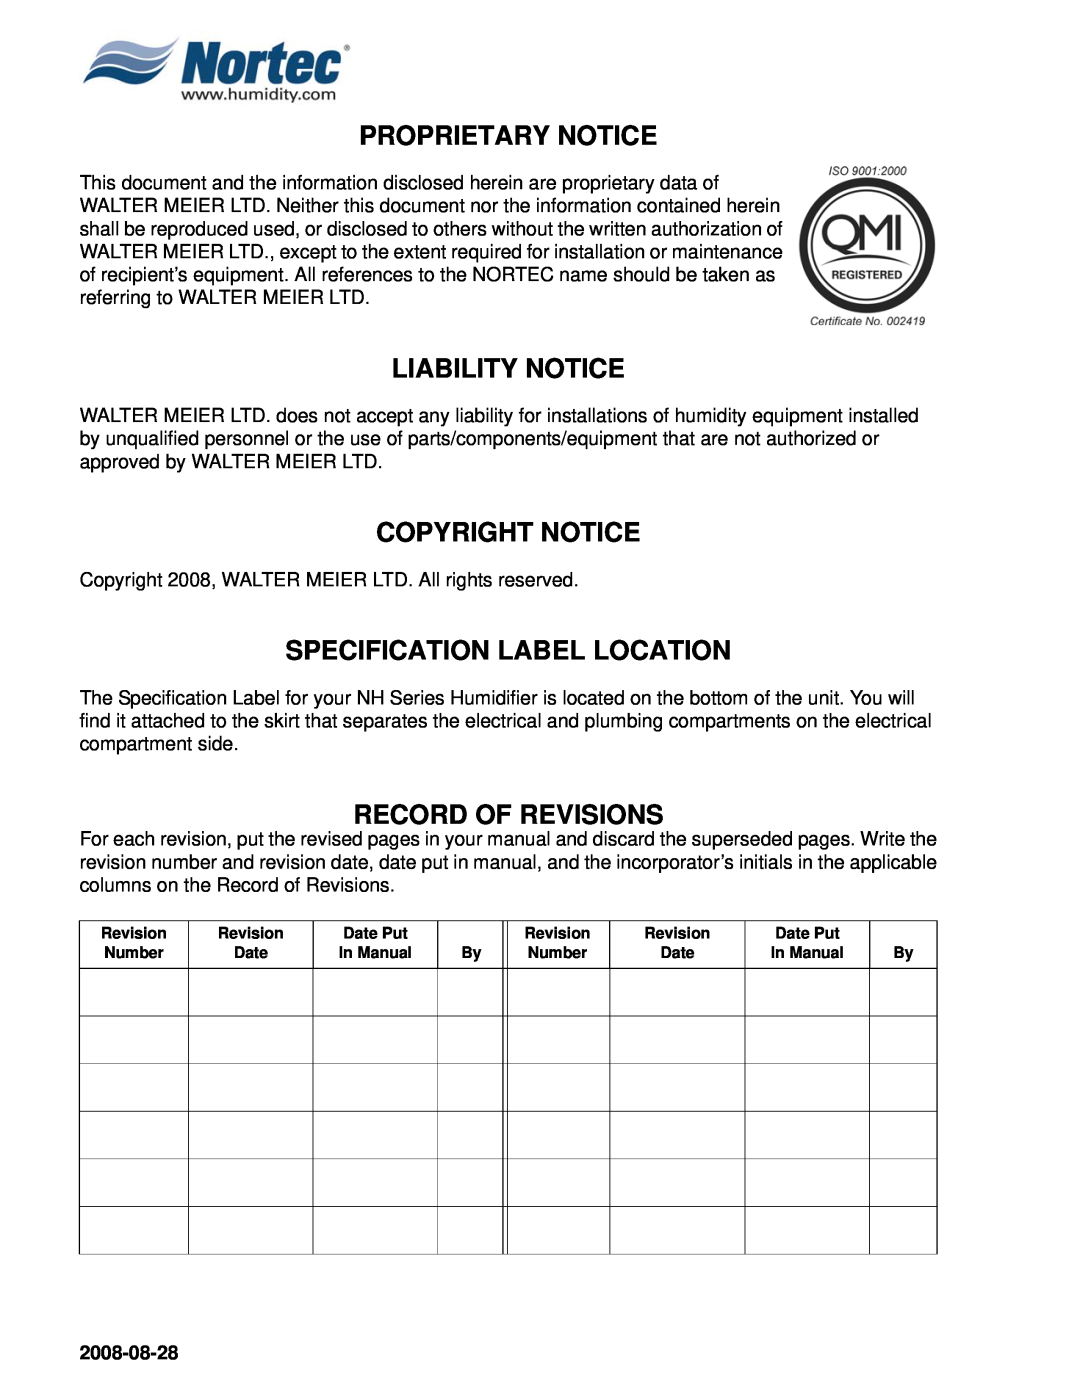 Nortec NH Series Proprietary Notice, Liability Notice, Copyright Notice, Specification Label Location, Record Of Revisions 